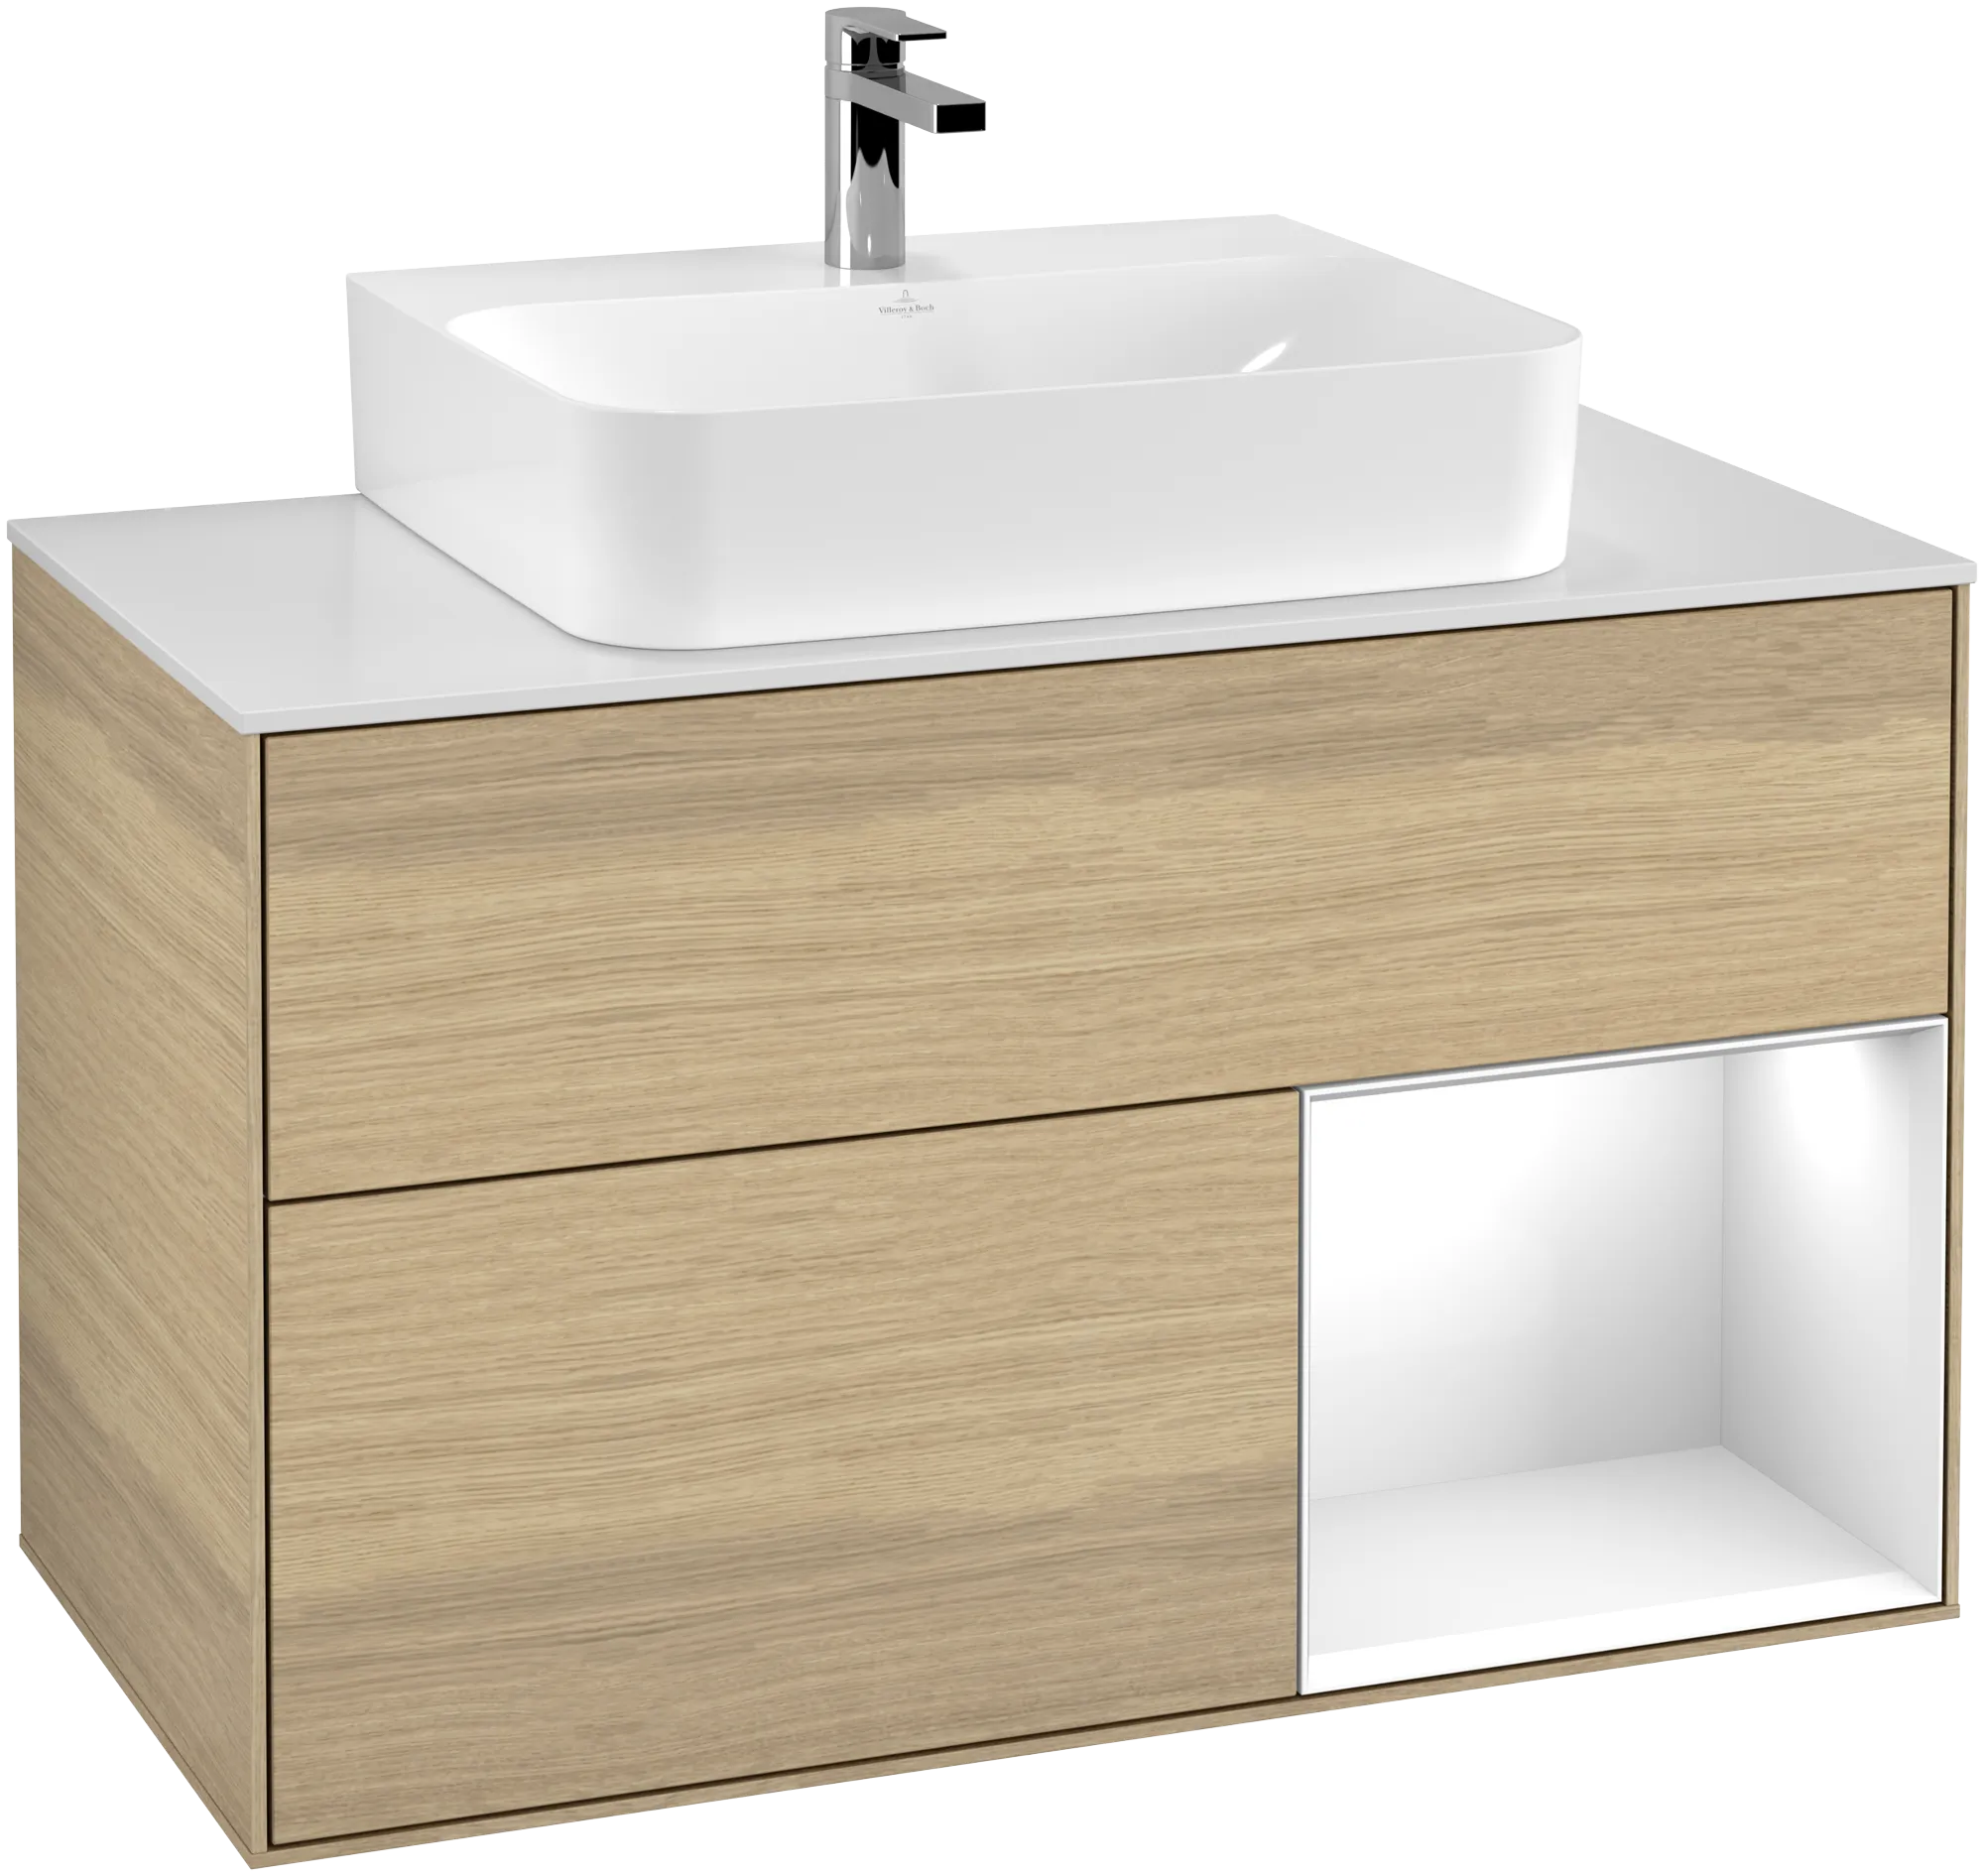 Picture of VILLEROY BOCH Finion Vanity unit, with lighting, 2 pull-out compartments, 1000 x 603 x 501 mm, Oak Veneer / Glossy White Lacquer / Glass White Matt #G121GFPC